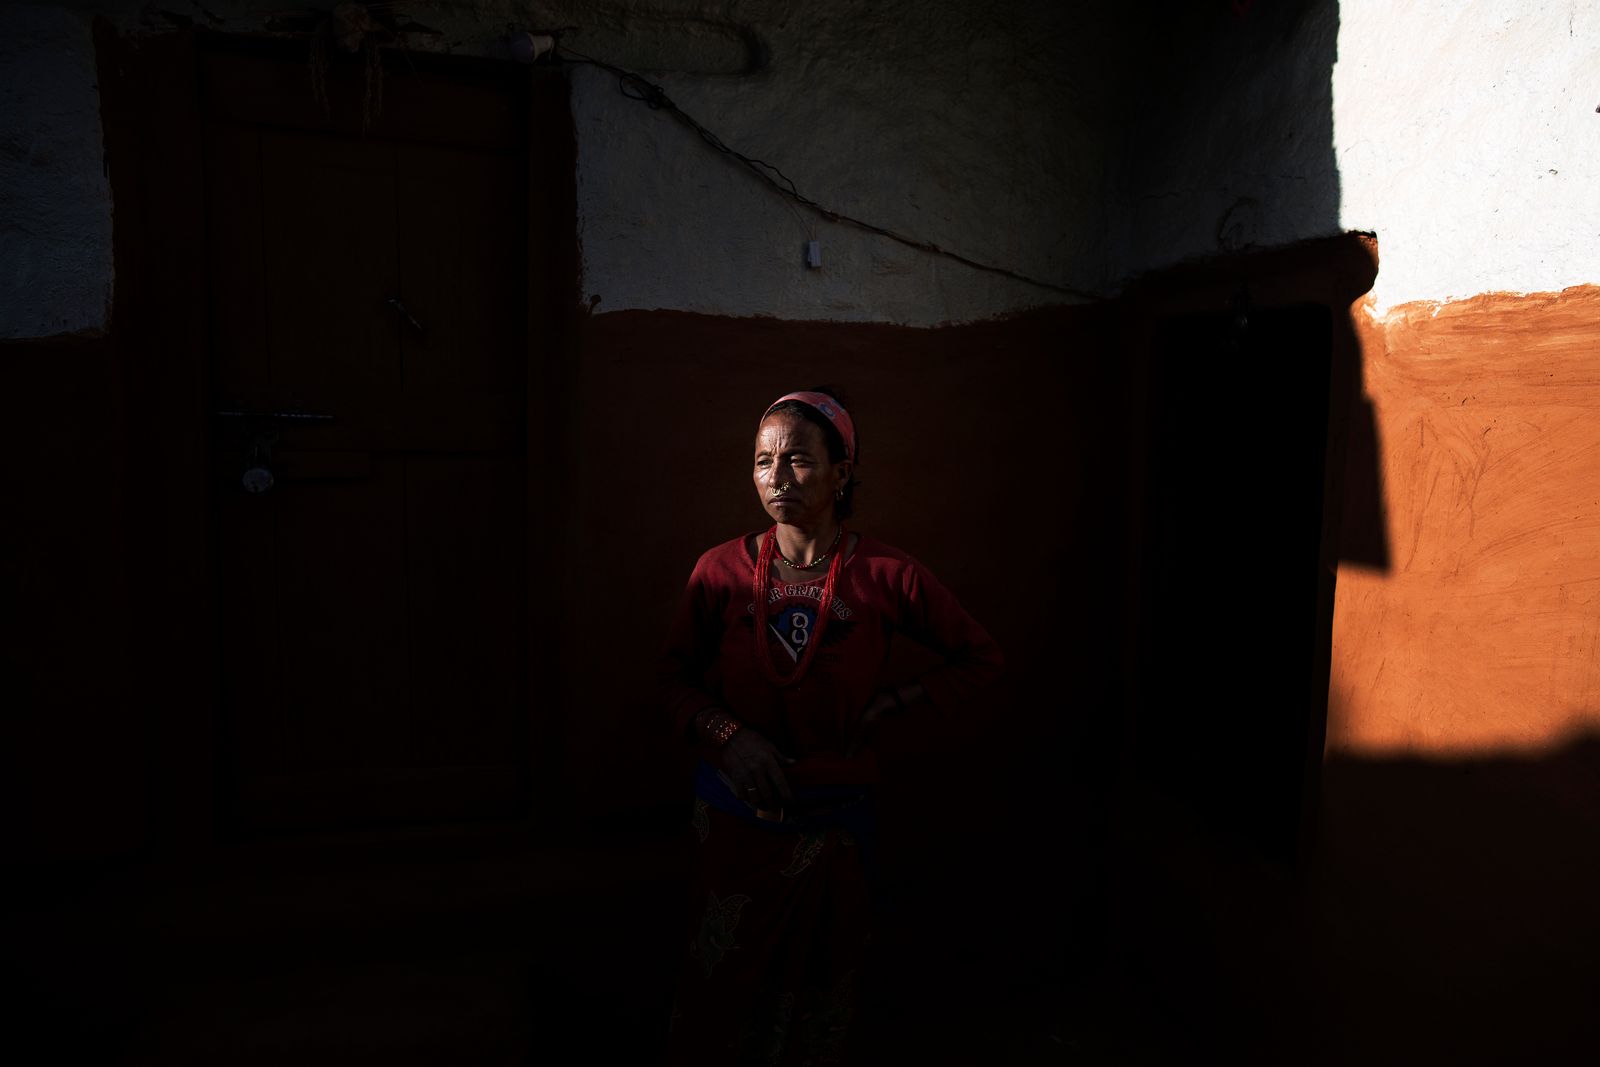 © TaraTW - Image from the Chhaupadi - the outlawed practice still hurting women in Nepal photography project